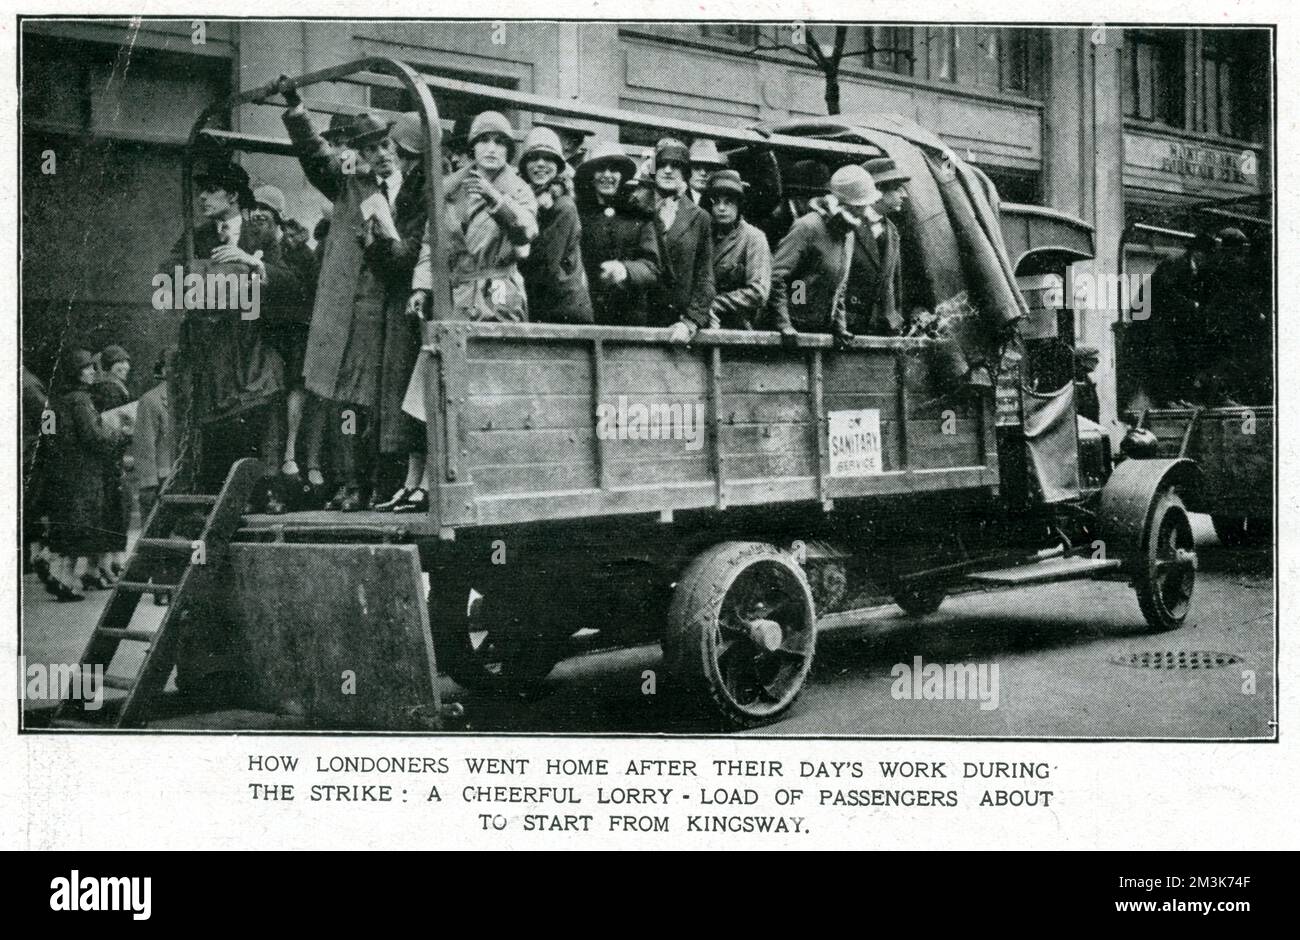 A lorry-load of Londoners in Kingsway, returning home after a day's work during the General Strike.   In support of a strike by coal miners over the issue of threatened wage cuts, the Trades Union Congress called a General Strike in early May 1926. The strike only involved certain key industrial sectors (docks, electricity, gas, railways) but, in the face of well-organised government emergency measures and lack of real public support, it collapsed after nine days.     Date: May 1926 Stock Photo